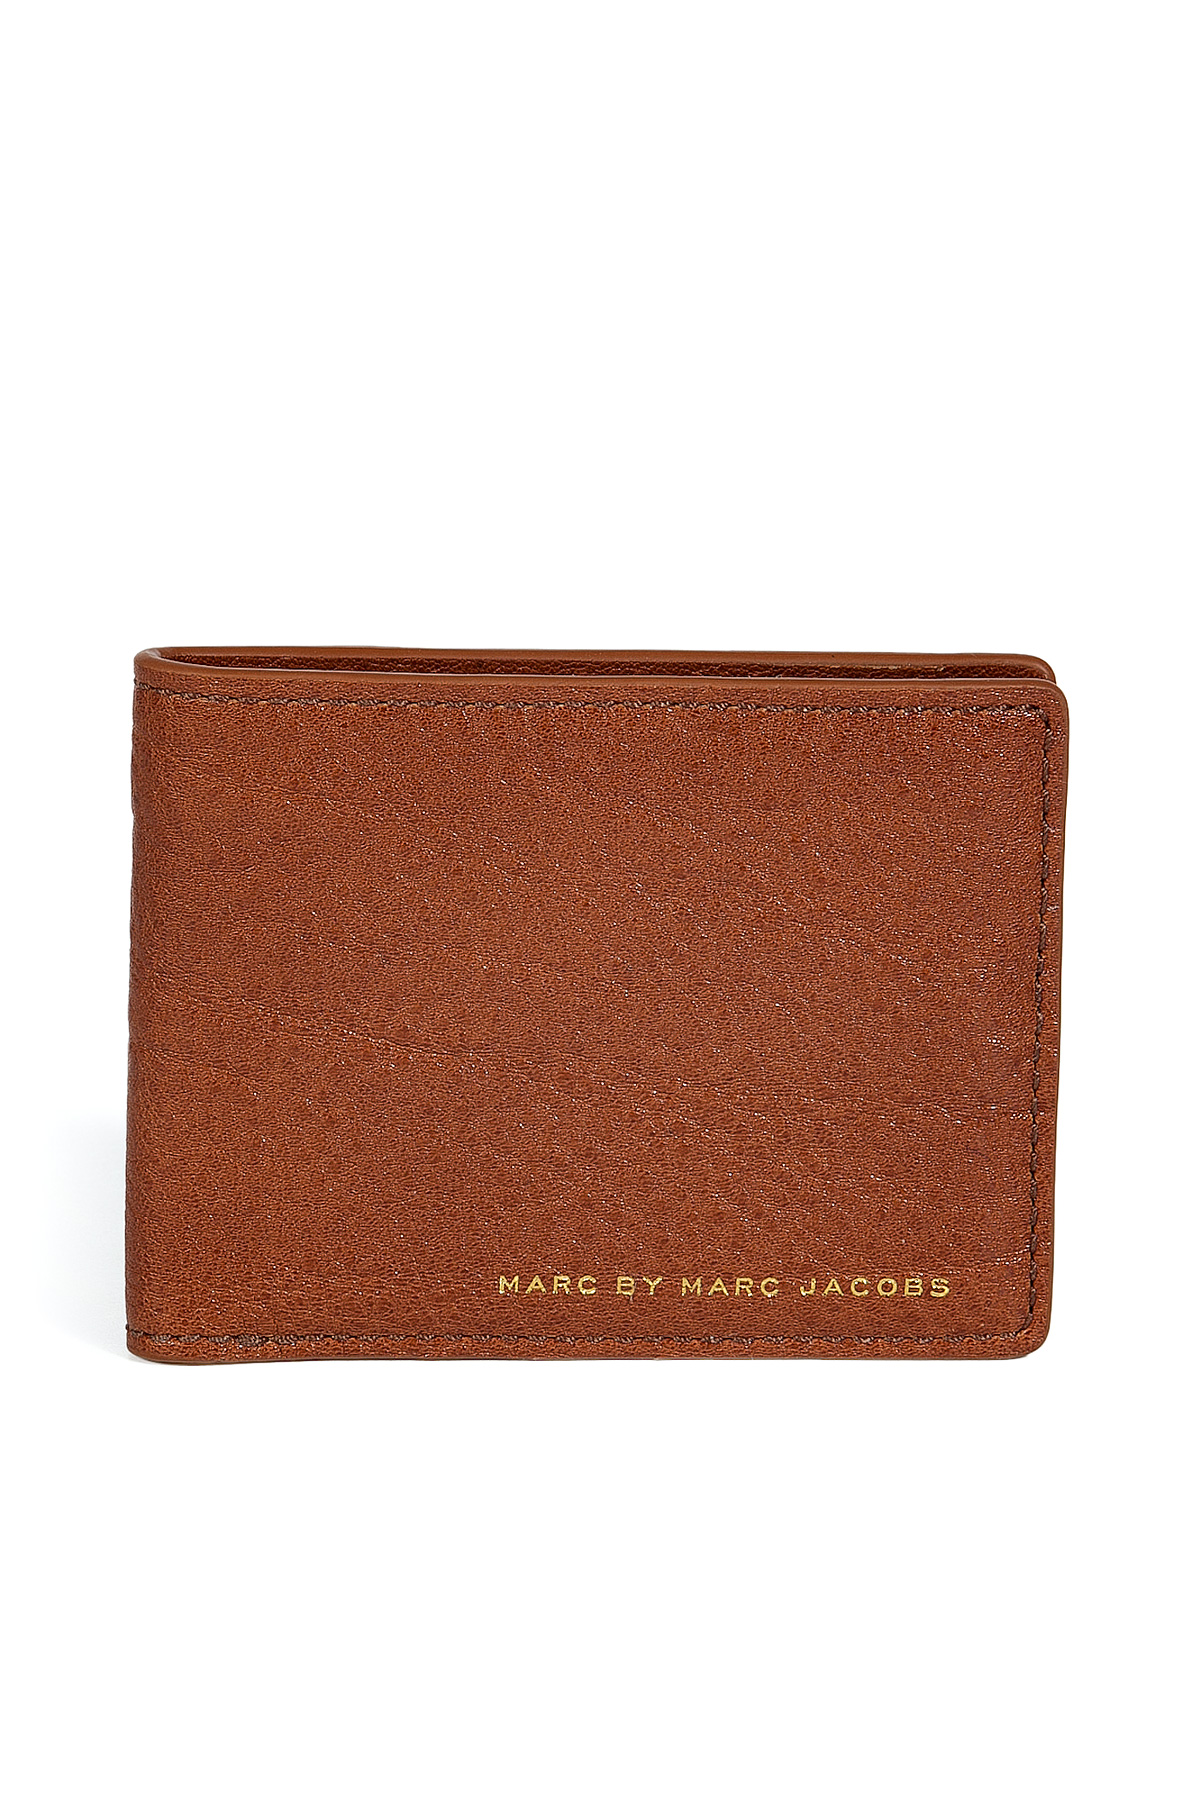 Marc By Marc Jacobs Classic Wallet in Brown for Men | Lyst